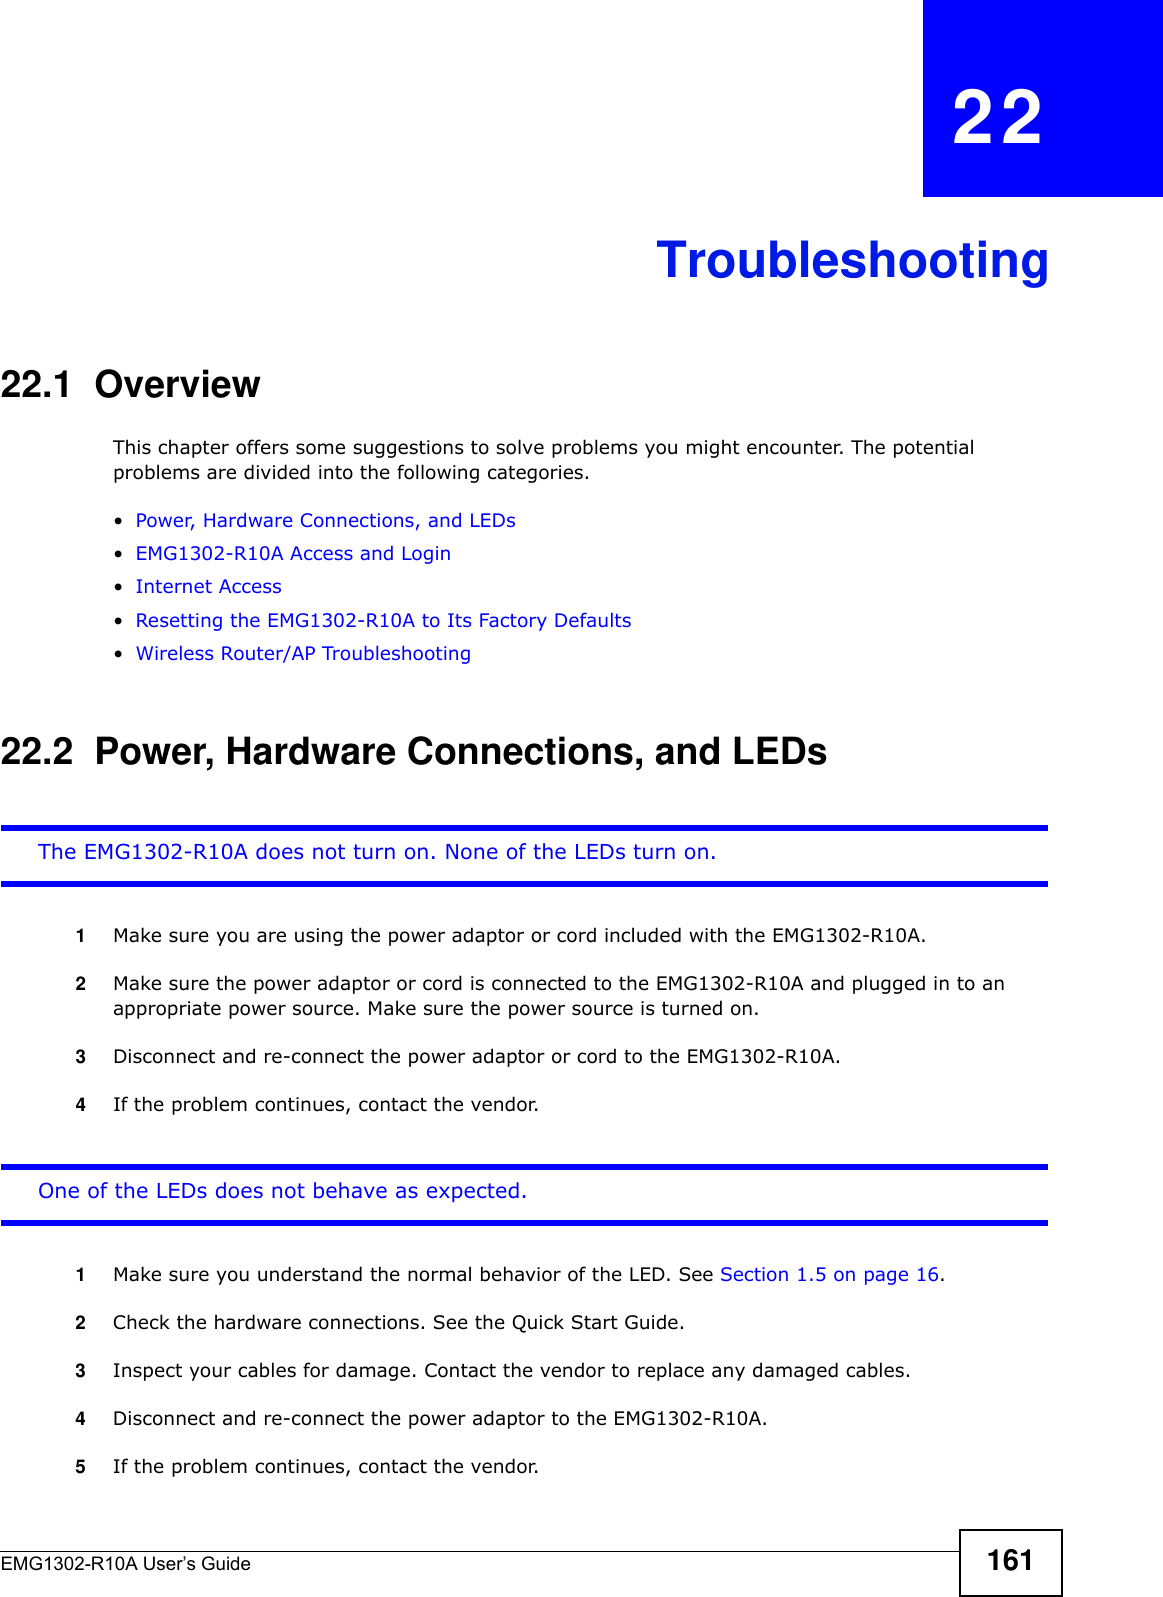 EMG1302-R10A User’s Guide 161CHAPTER   22Troubleshooting22.1  OverviewThis chapter offers some suggestions to solve problems you might encounter. The potential problems are divided into the following categories. •Power, Hardware Connections, and LEDs•EMG1302-R10A Access and Login•Internet Access•Resetting the EMG1302-R10A to Its Factory Defaults•Wireless Router/AP Troubleshooting22.2  Power, Hardware Connections, and LEDsThe EMG1302-R10A does not turn on. None of the LEDs turn on.1Make sure you are using the power adaptor or cord included with the EMG1302-R10A.2Make sure the power adaptor or cord is connected to the EMG1302-R10A and plugged in to an appropriate power source. Make sure the power source is turned on.3Disconnect and re-connect the power adaptor or cord to the EMG1302-R10A.4If the problem continues, contact the vendor.One of the LEDs does not behave as expected.1Make sure you understand the normal behavior of the LED. See Section 1.5 on page 16.2Check the hardware connections. See the Quick Start Guide. 3Inspect your cables for damage. Contact the vendor to replace any damaged cables.4Disconnect and re-connect the power adaptor to the EMG1302-R10A. 5If the problem continues, contact the vendor.